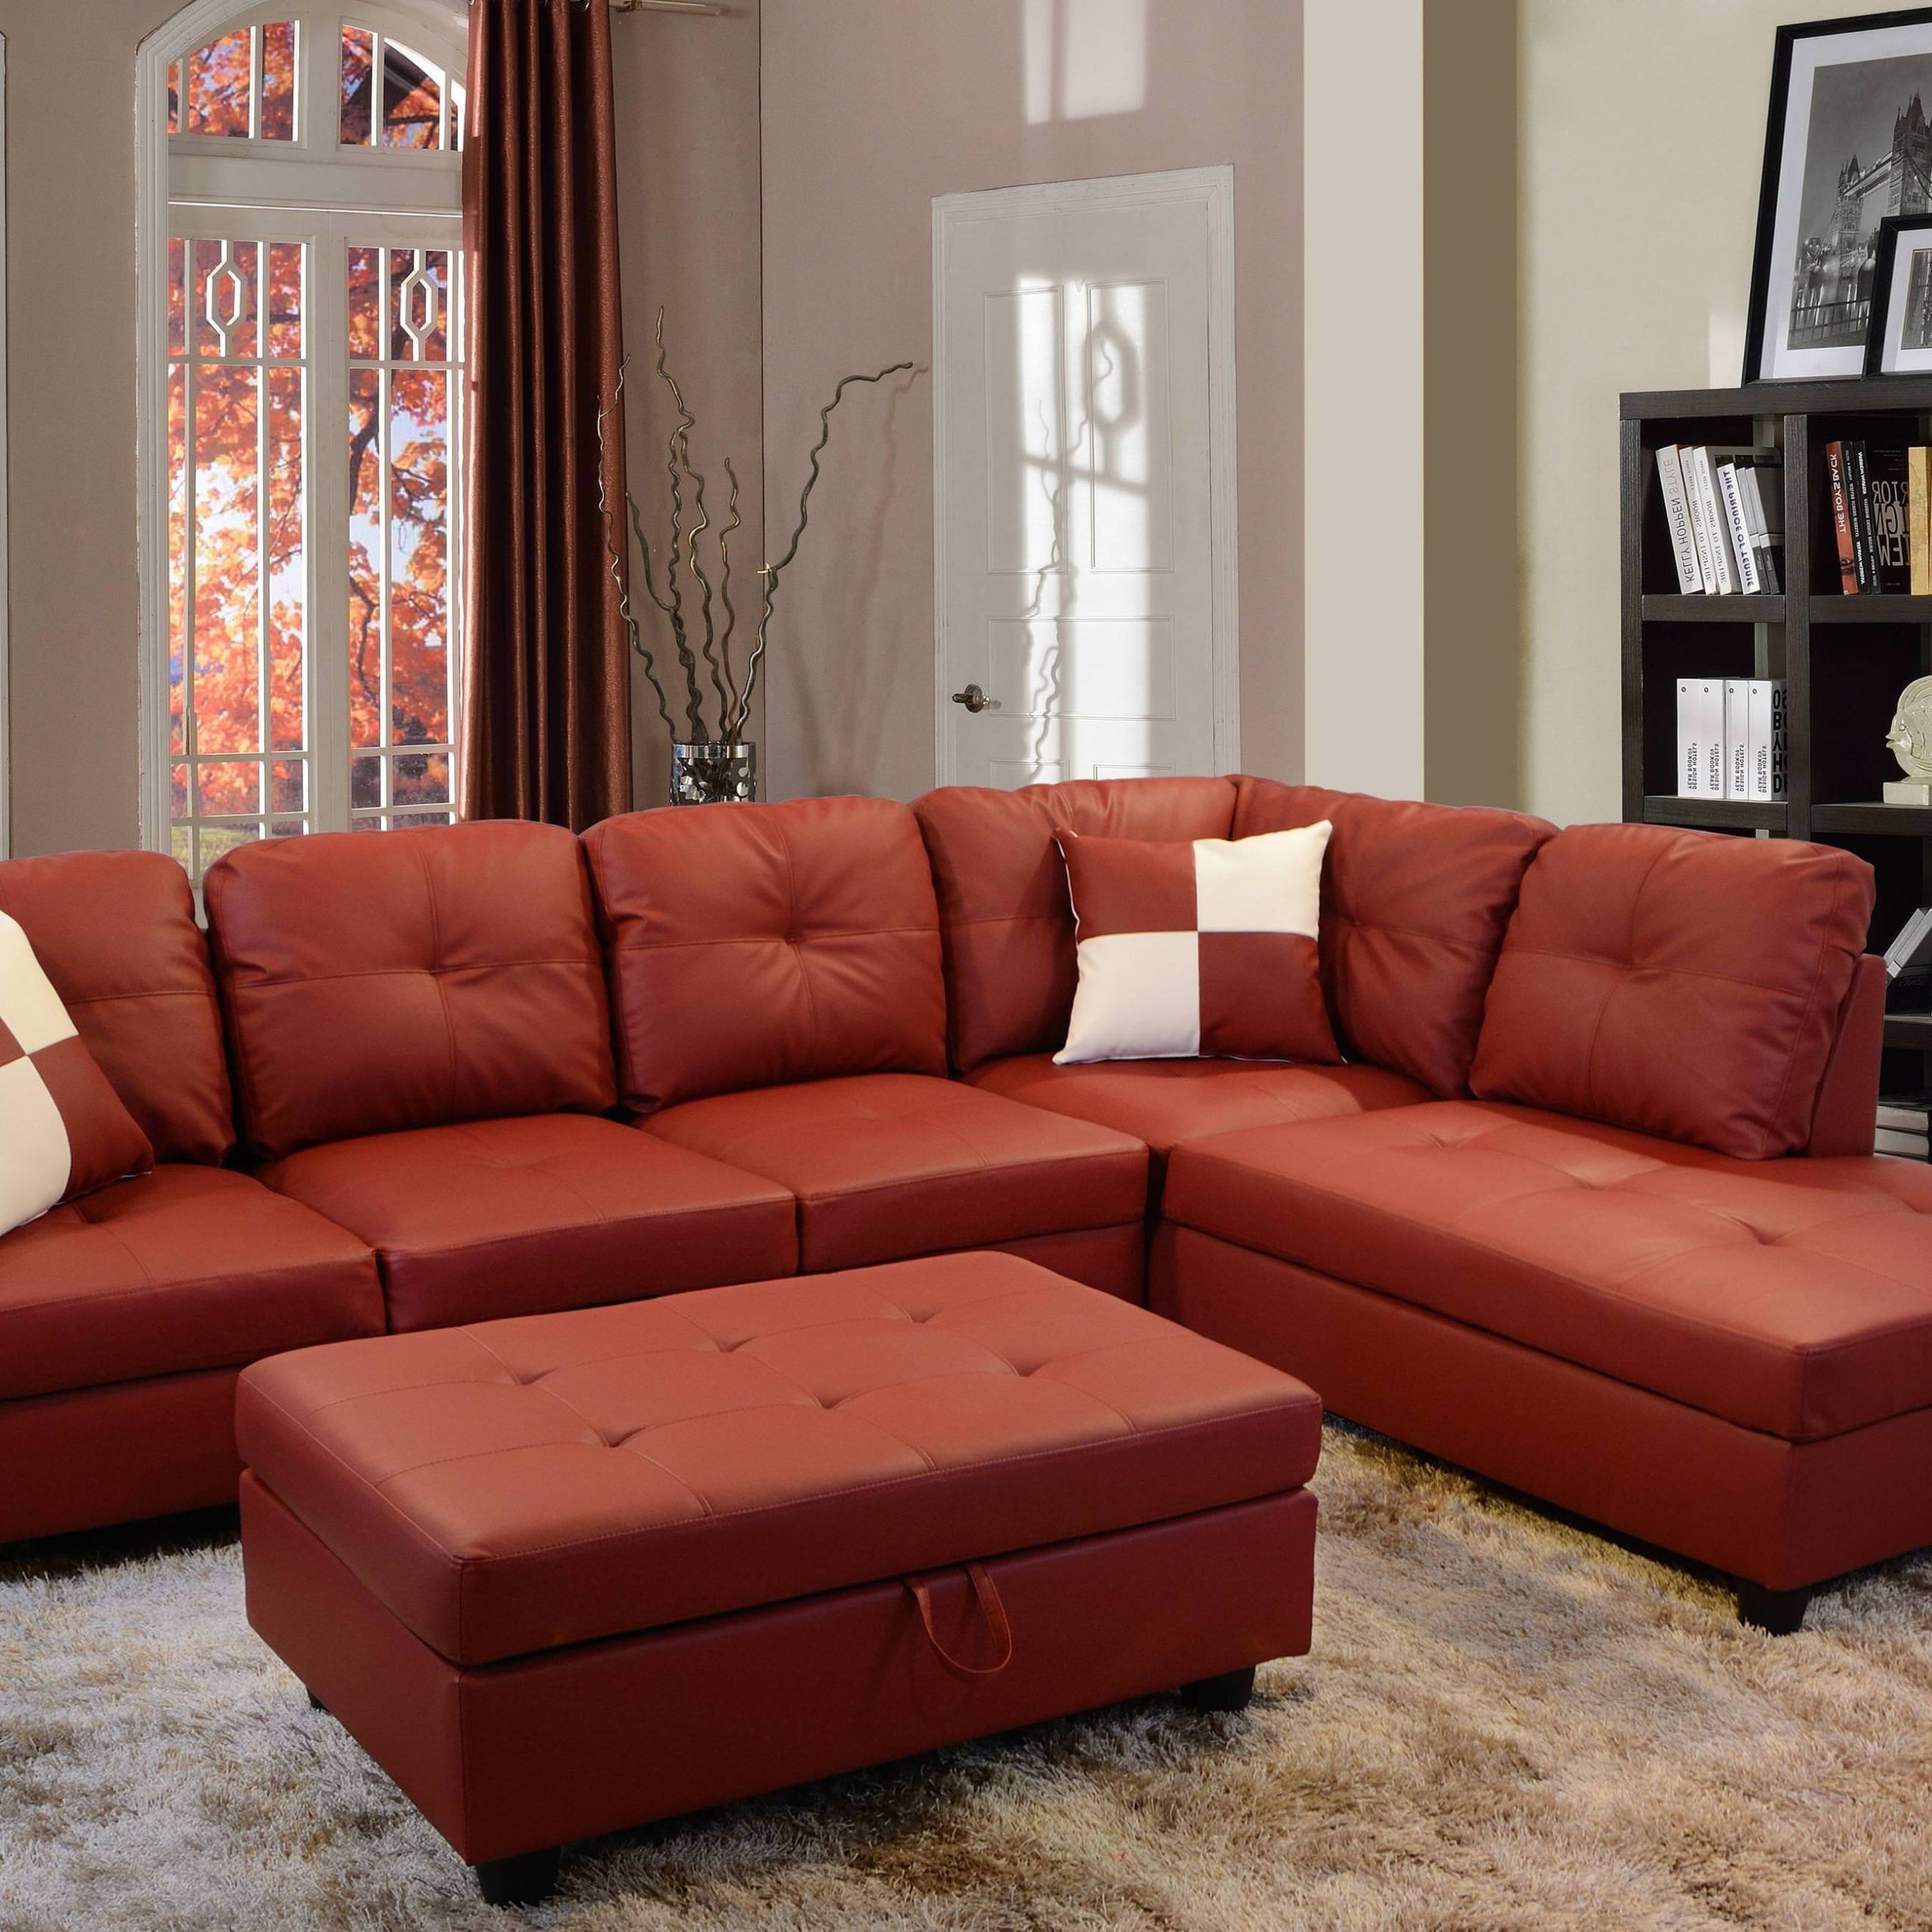 Raphael Faux Leather Left Facing Sectional Sofa With Ottoman, Multiple Regarding Sofas With Ottomans (Gallery 17 of 20)